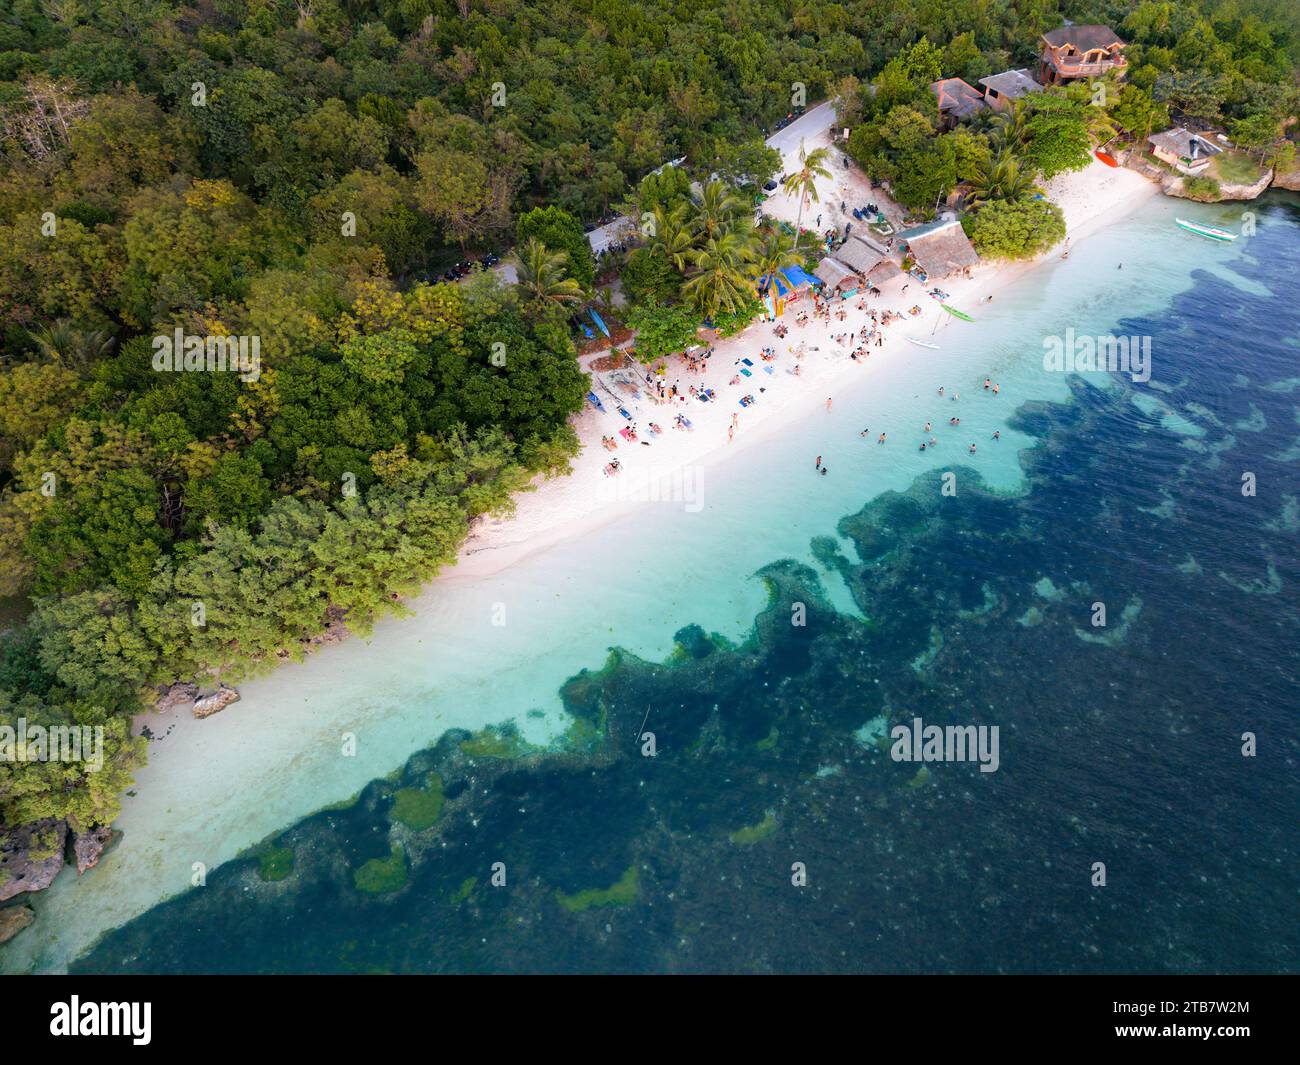 An aerial view of Paliton Beach, Siquijor, Philippines Stock Photo